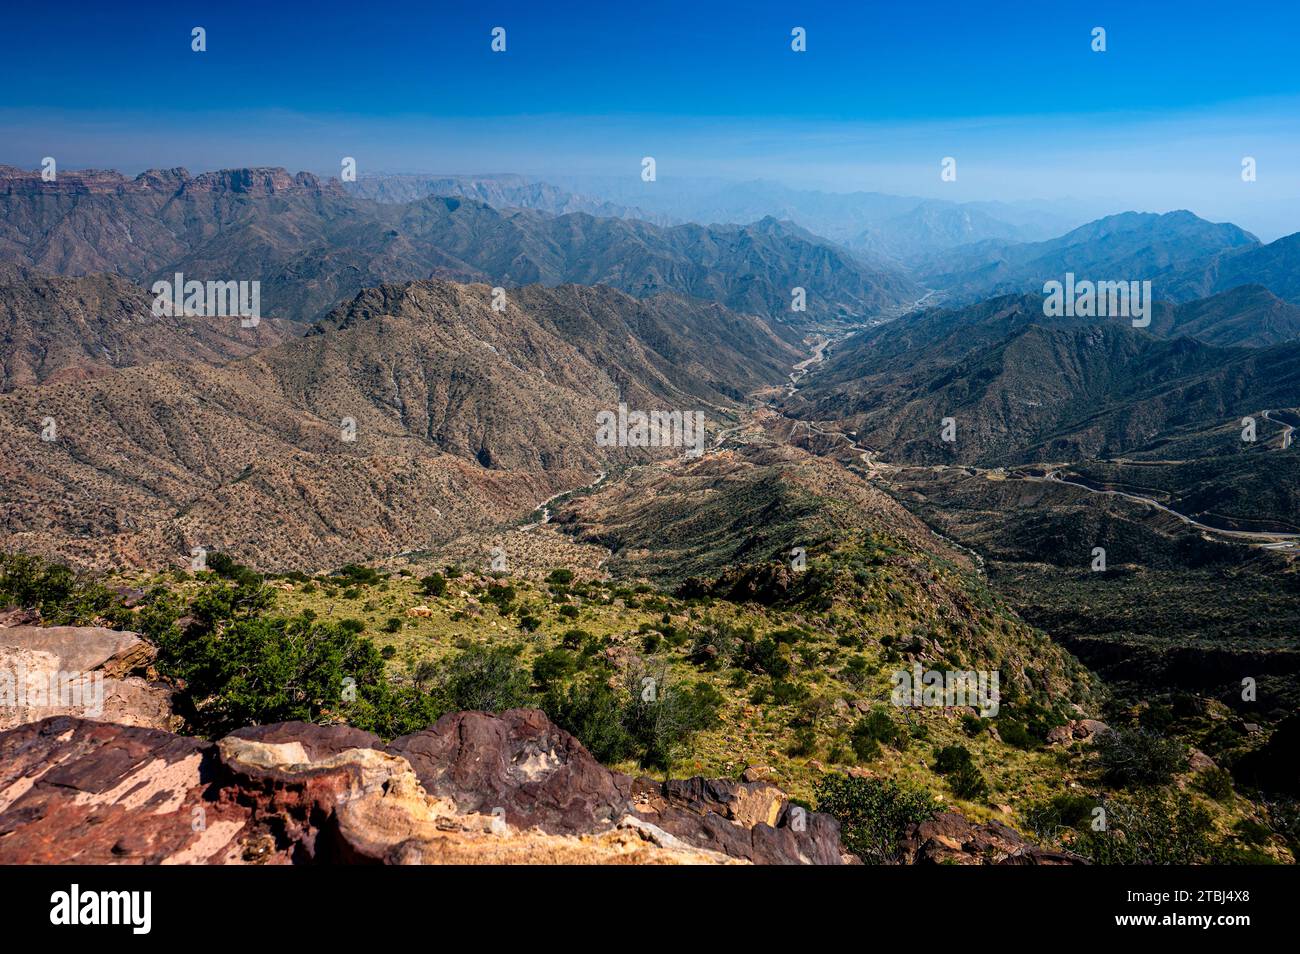 Landscape of the Asir Mountains in Saudi Arabia. Stock Photo